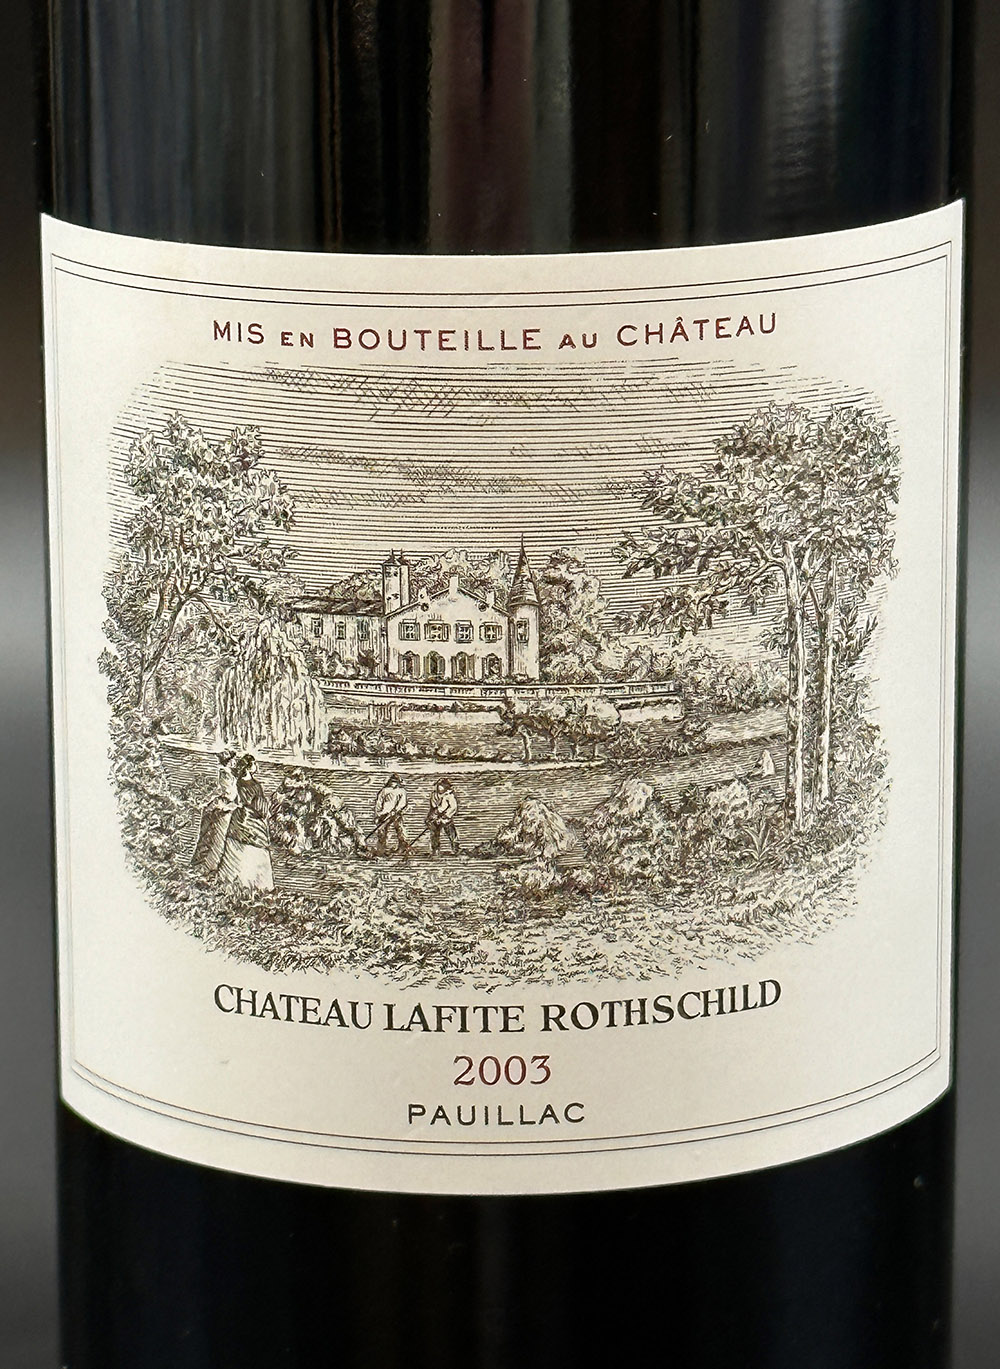 1 bottle of red wine. Château Lafite ROTHSCHILD. Pauillac. 2003. France. - Image 2 of 4